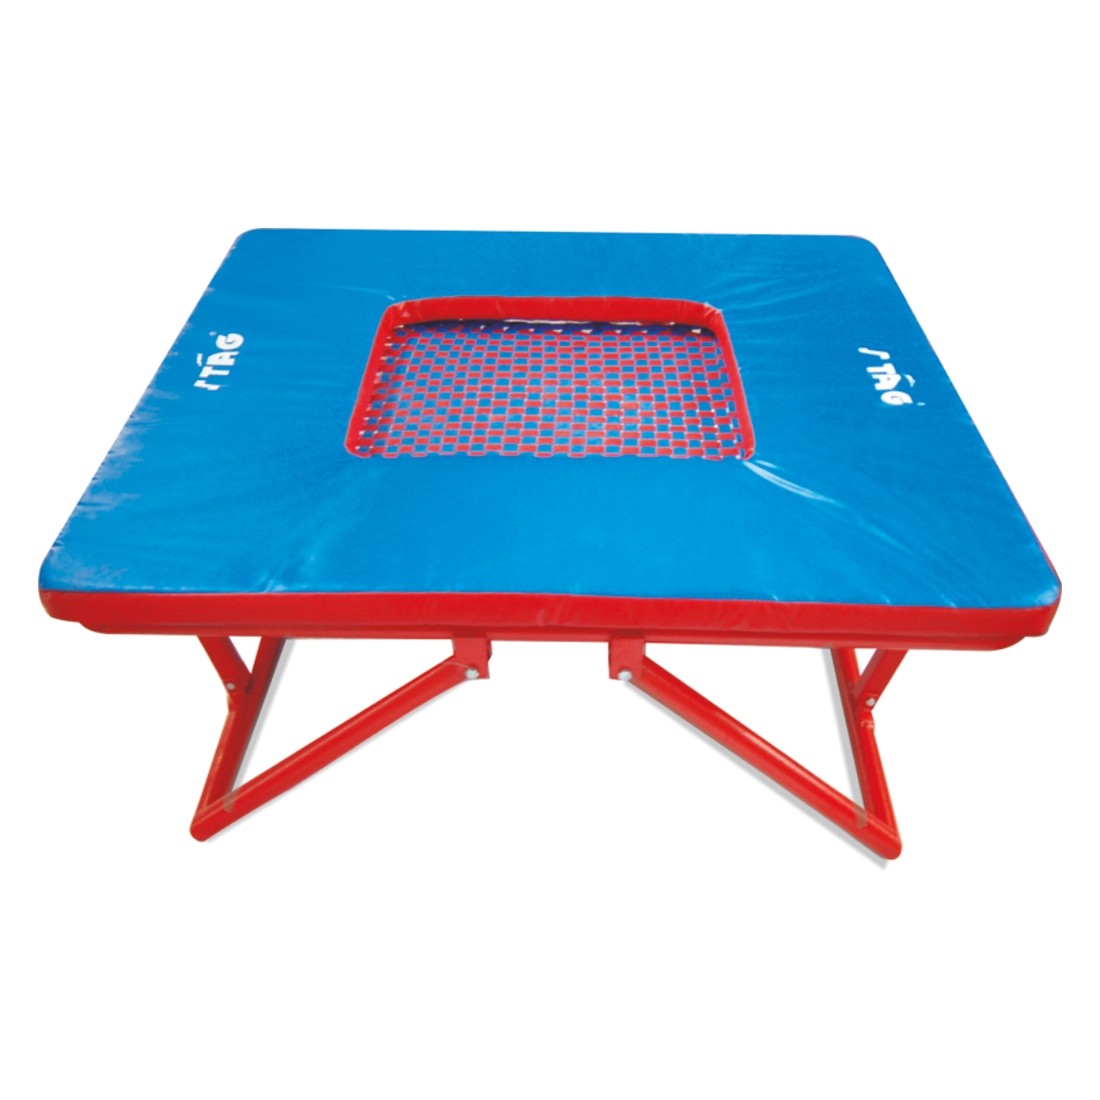 STAG TRAMPOLINE 1.20MTR X 1.20MTR ADJUSTABLE HEIGHT